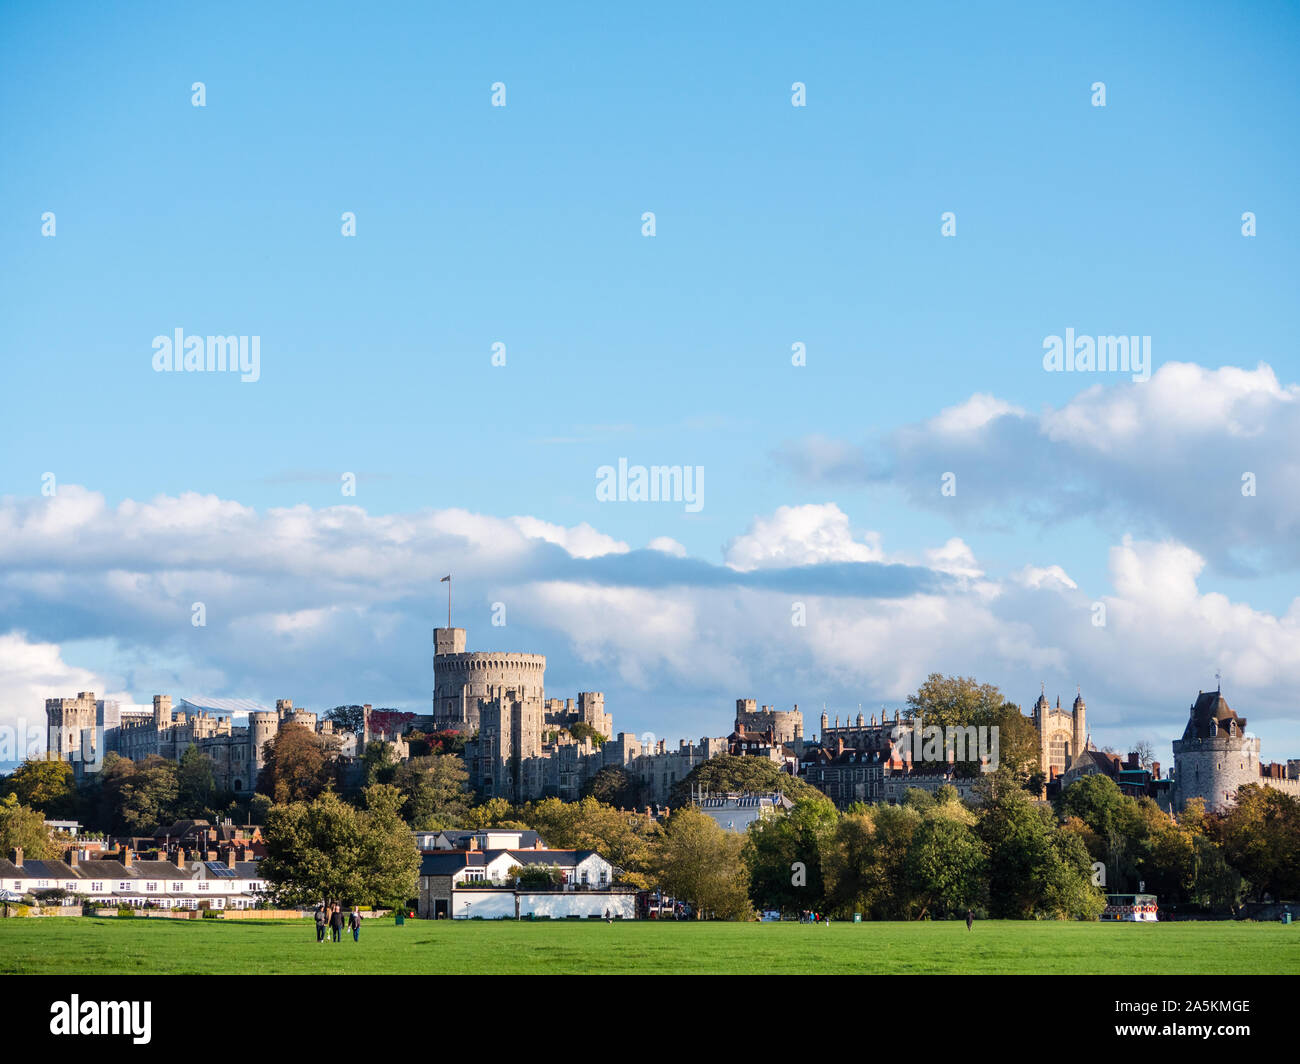 Three People Walking Across The Brocas, Windsor, With Windsor Castle Looming Over Them, Berkshire, England, UK, GB. Stock Photo